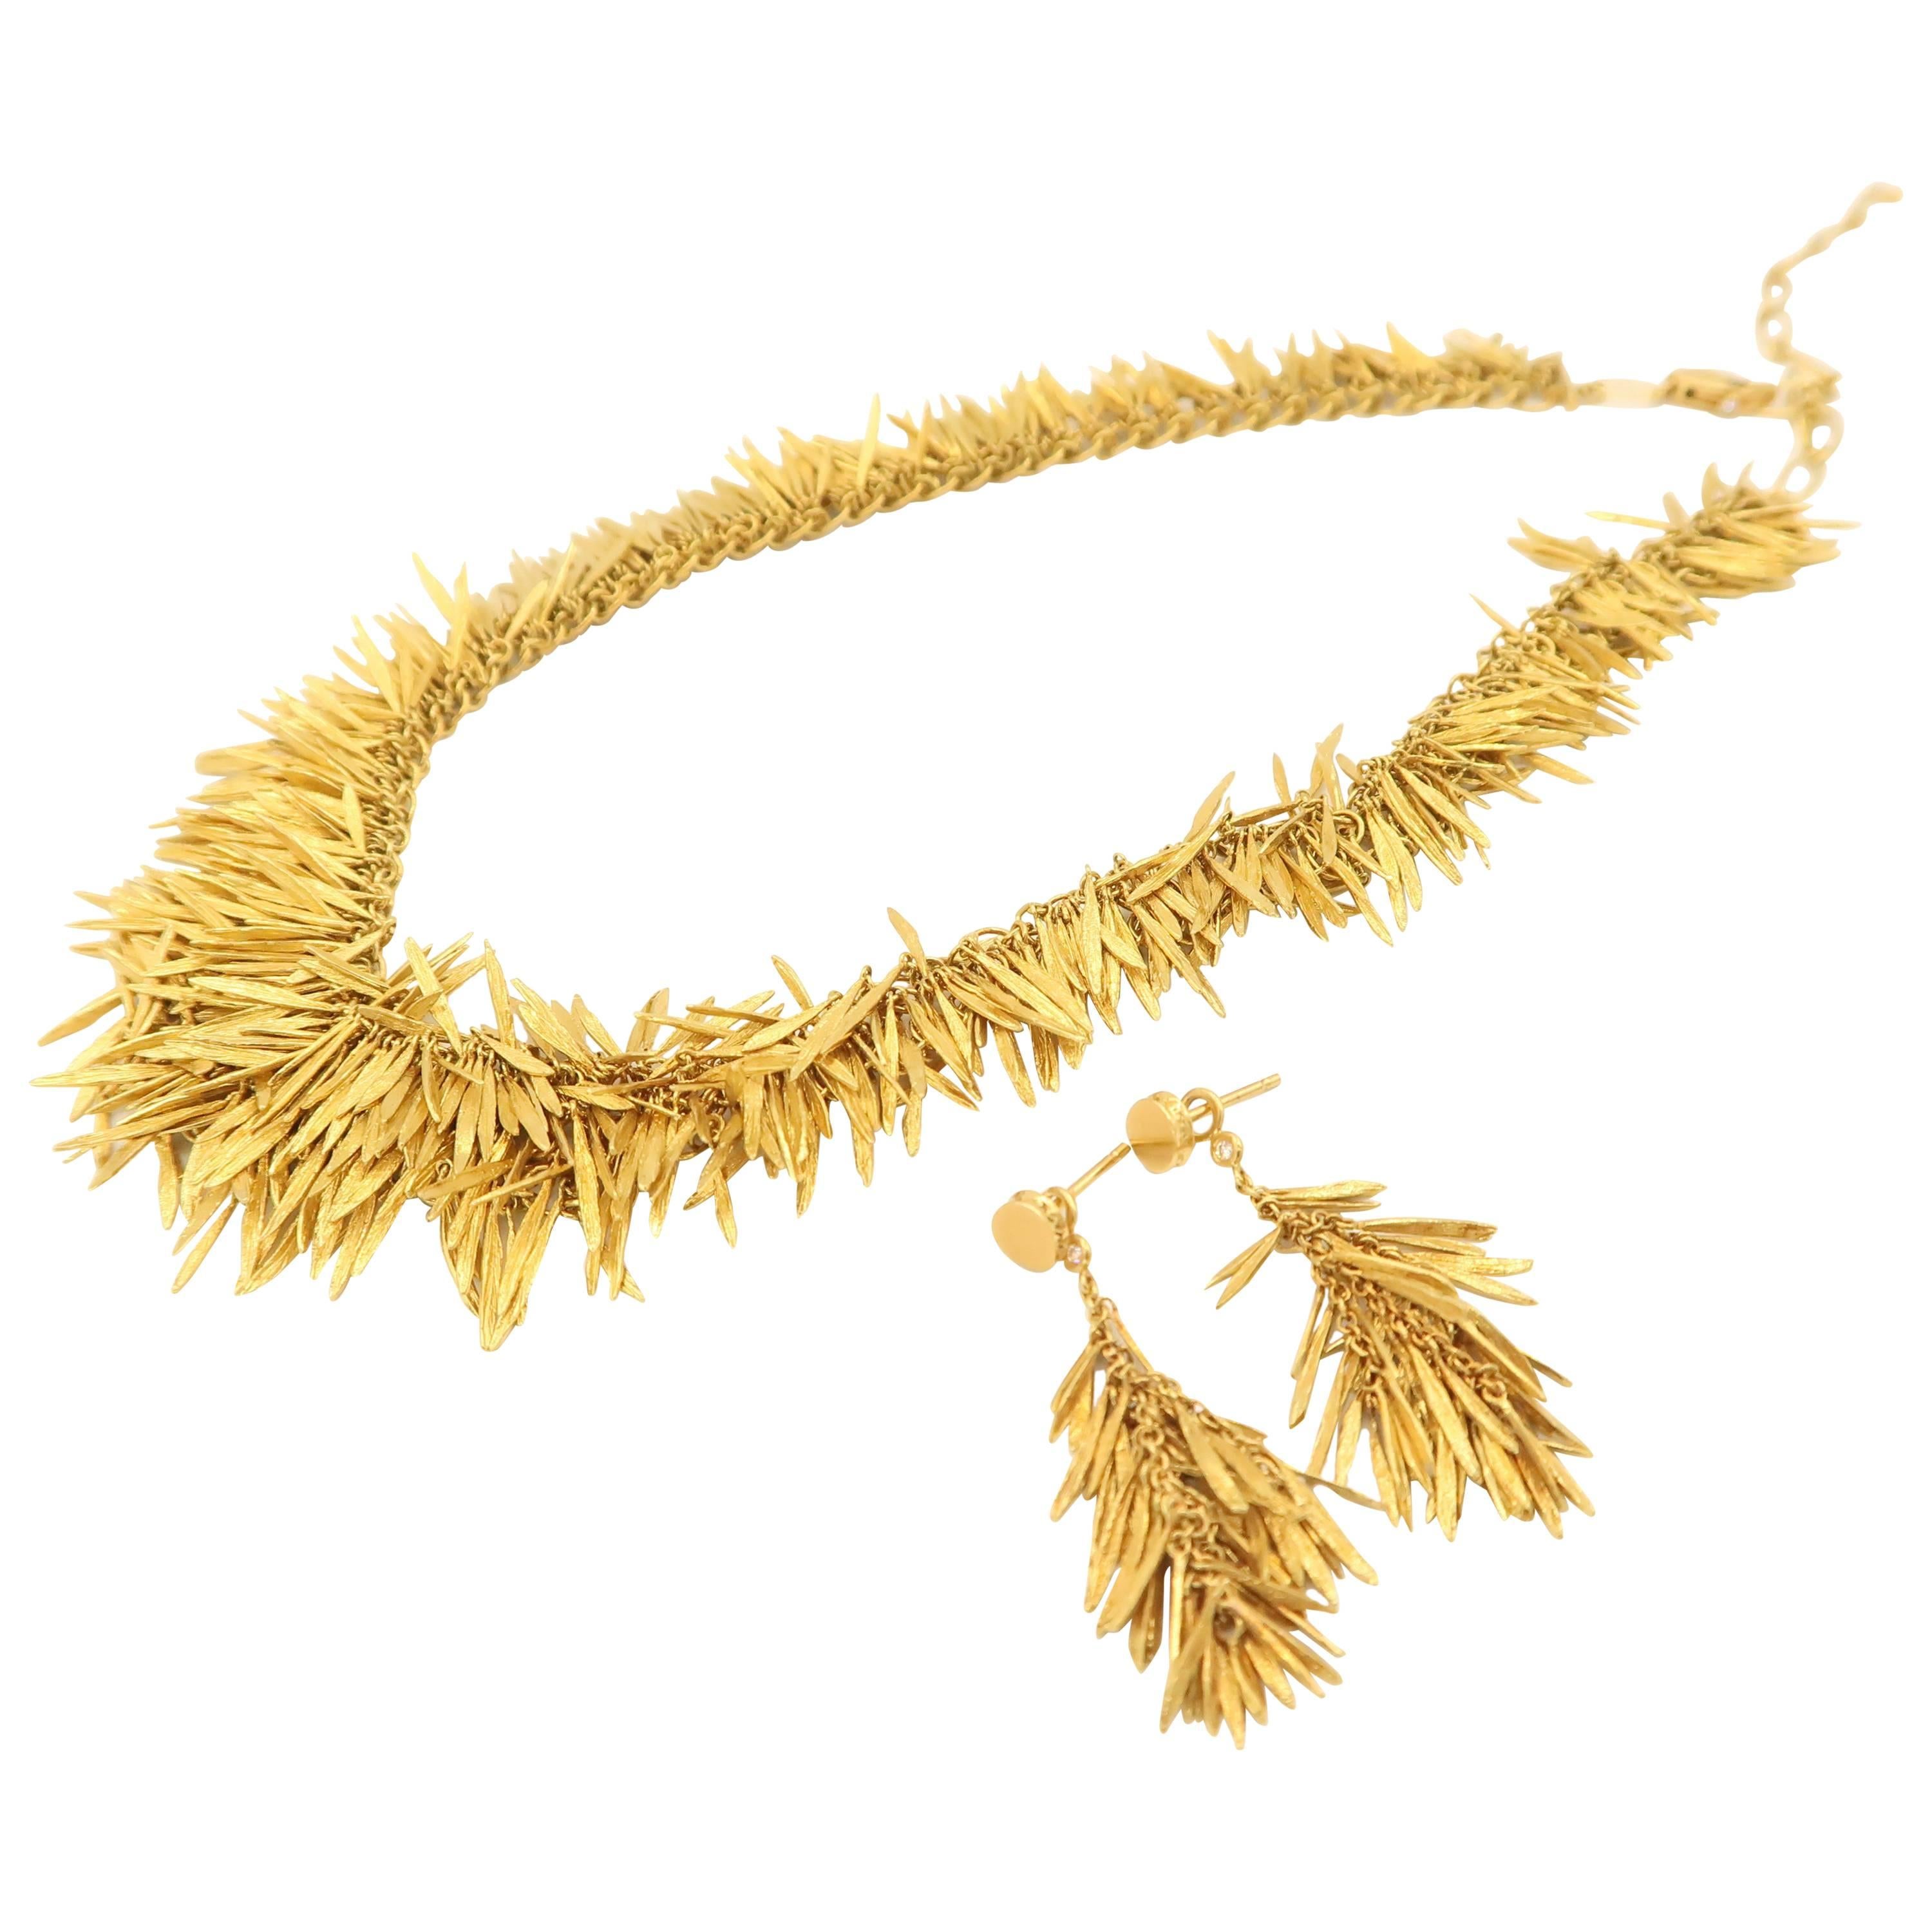 Individual handcrafted feather motifs create the antique golden layered effect for this exceptional H. Stern necklace and earrings set. Feathers are entirely made by hands and linked to the chain.

H. Stern Feathers Brushed Gold Earrings
Gold :